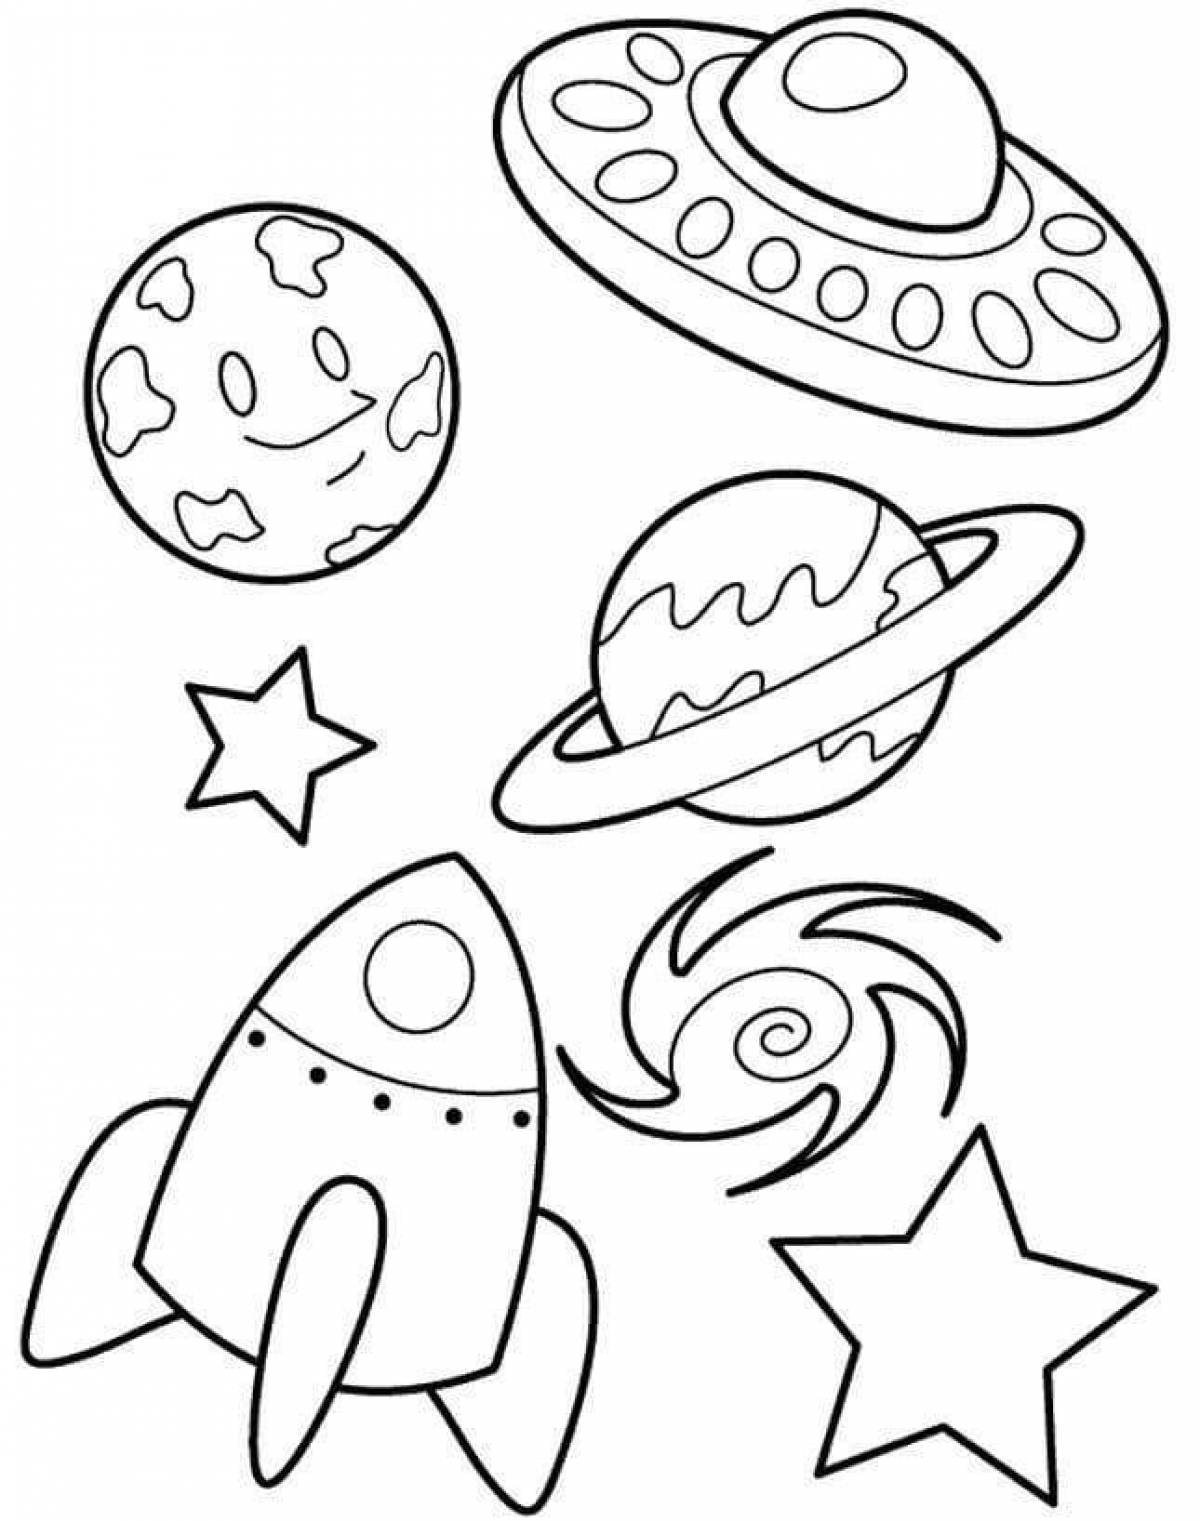 Exotic universe coloring page